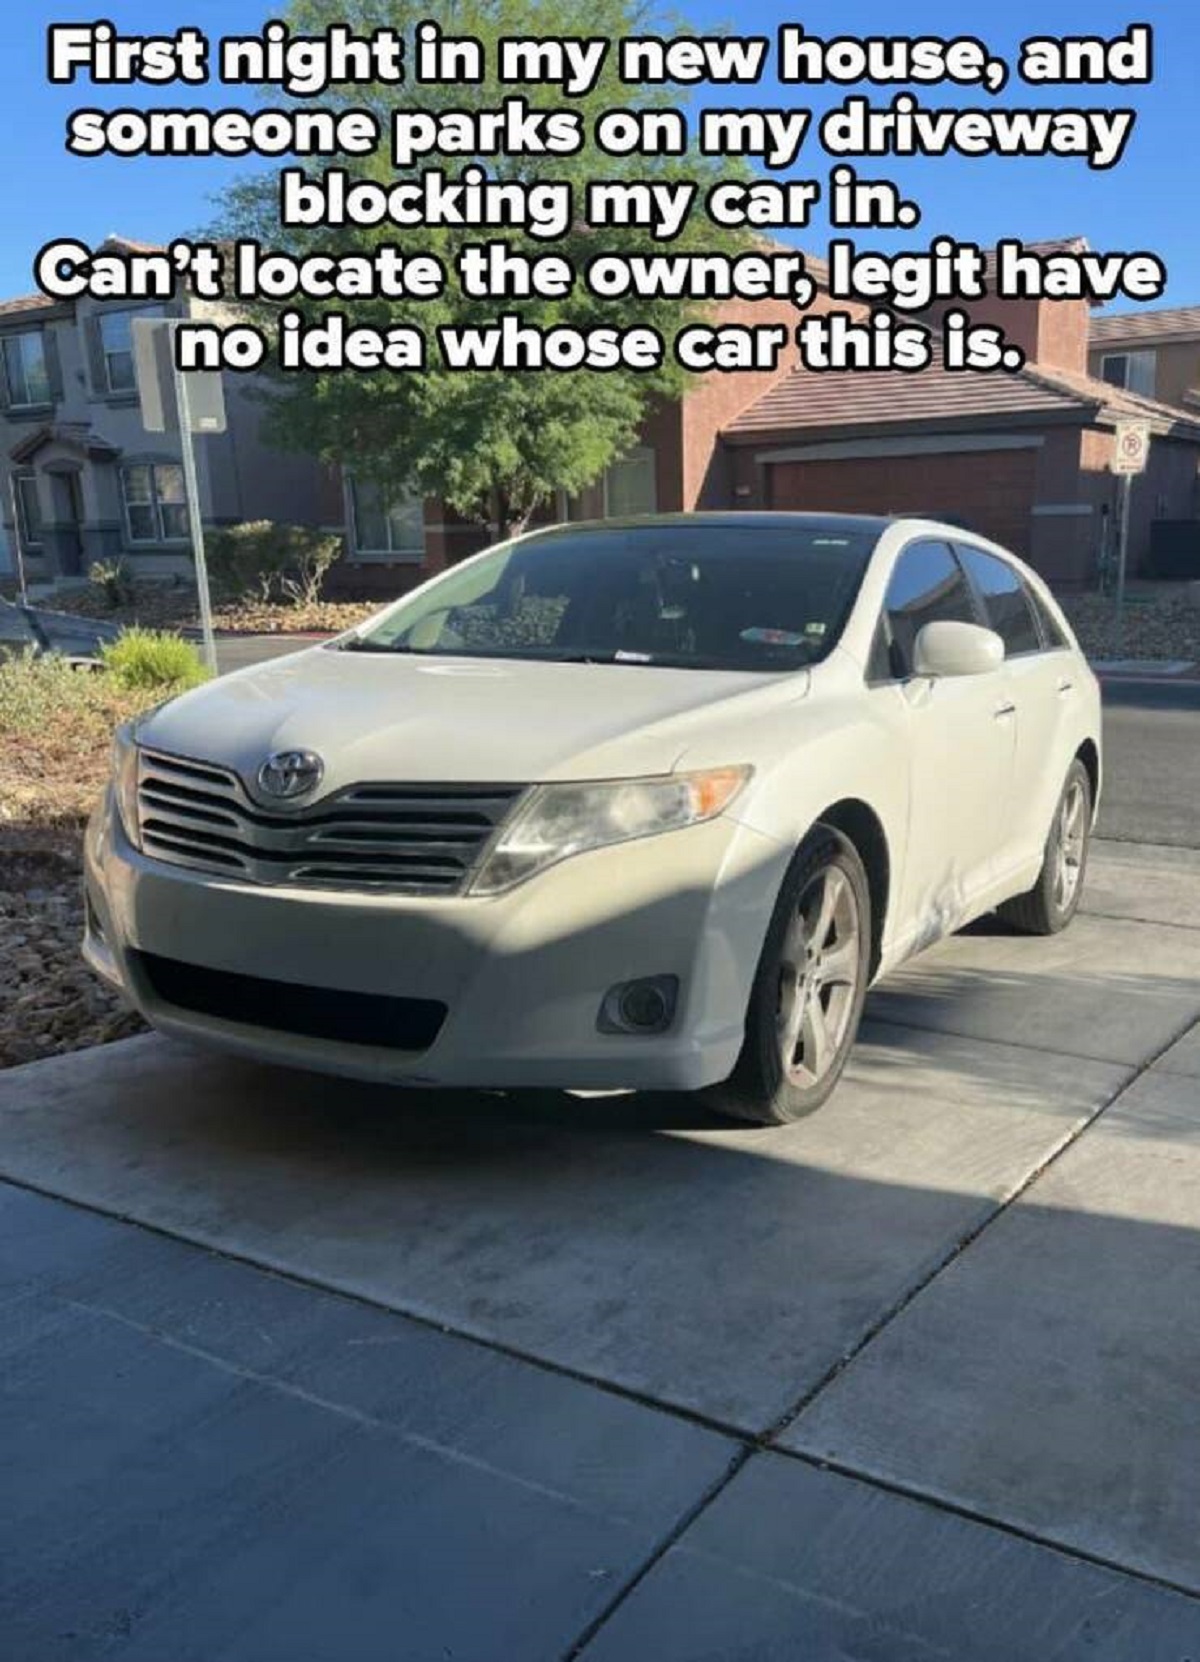 toyota venza - First night in my new house, and someone parks on my driveway blocking my car in. Can't locate the owner, legit have no idea whose car this is.